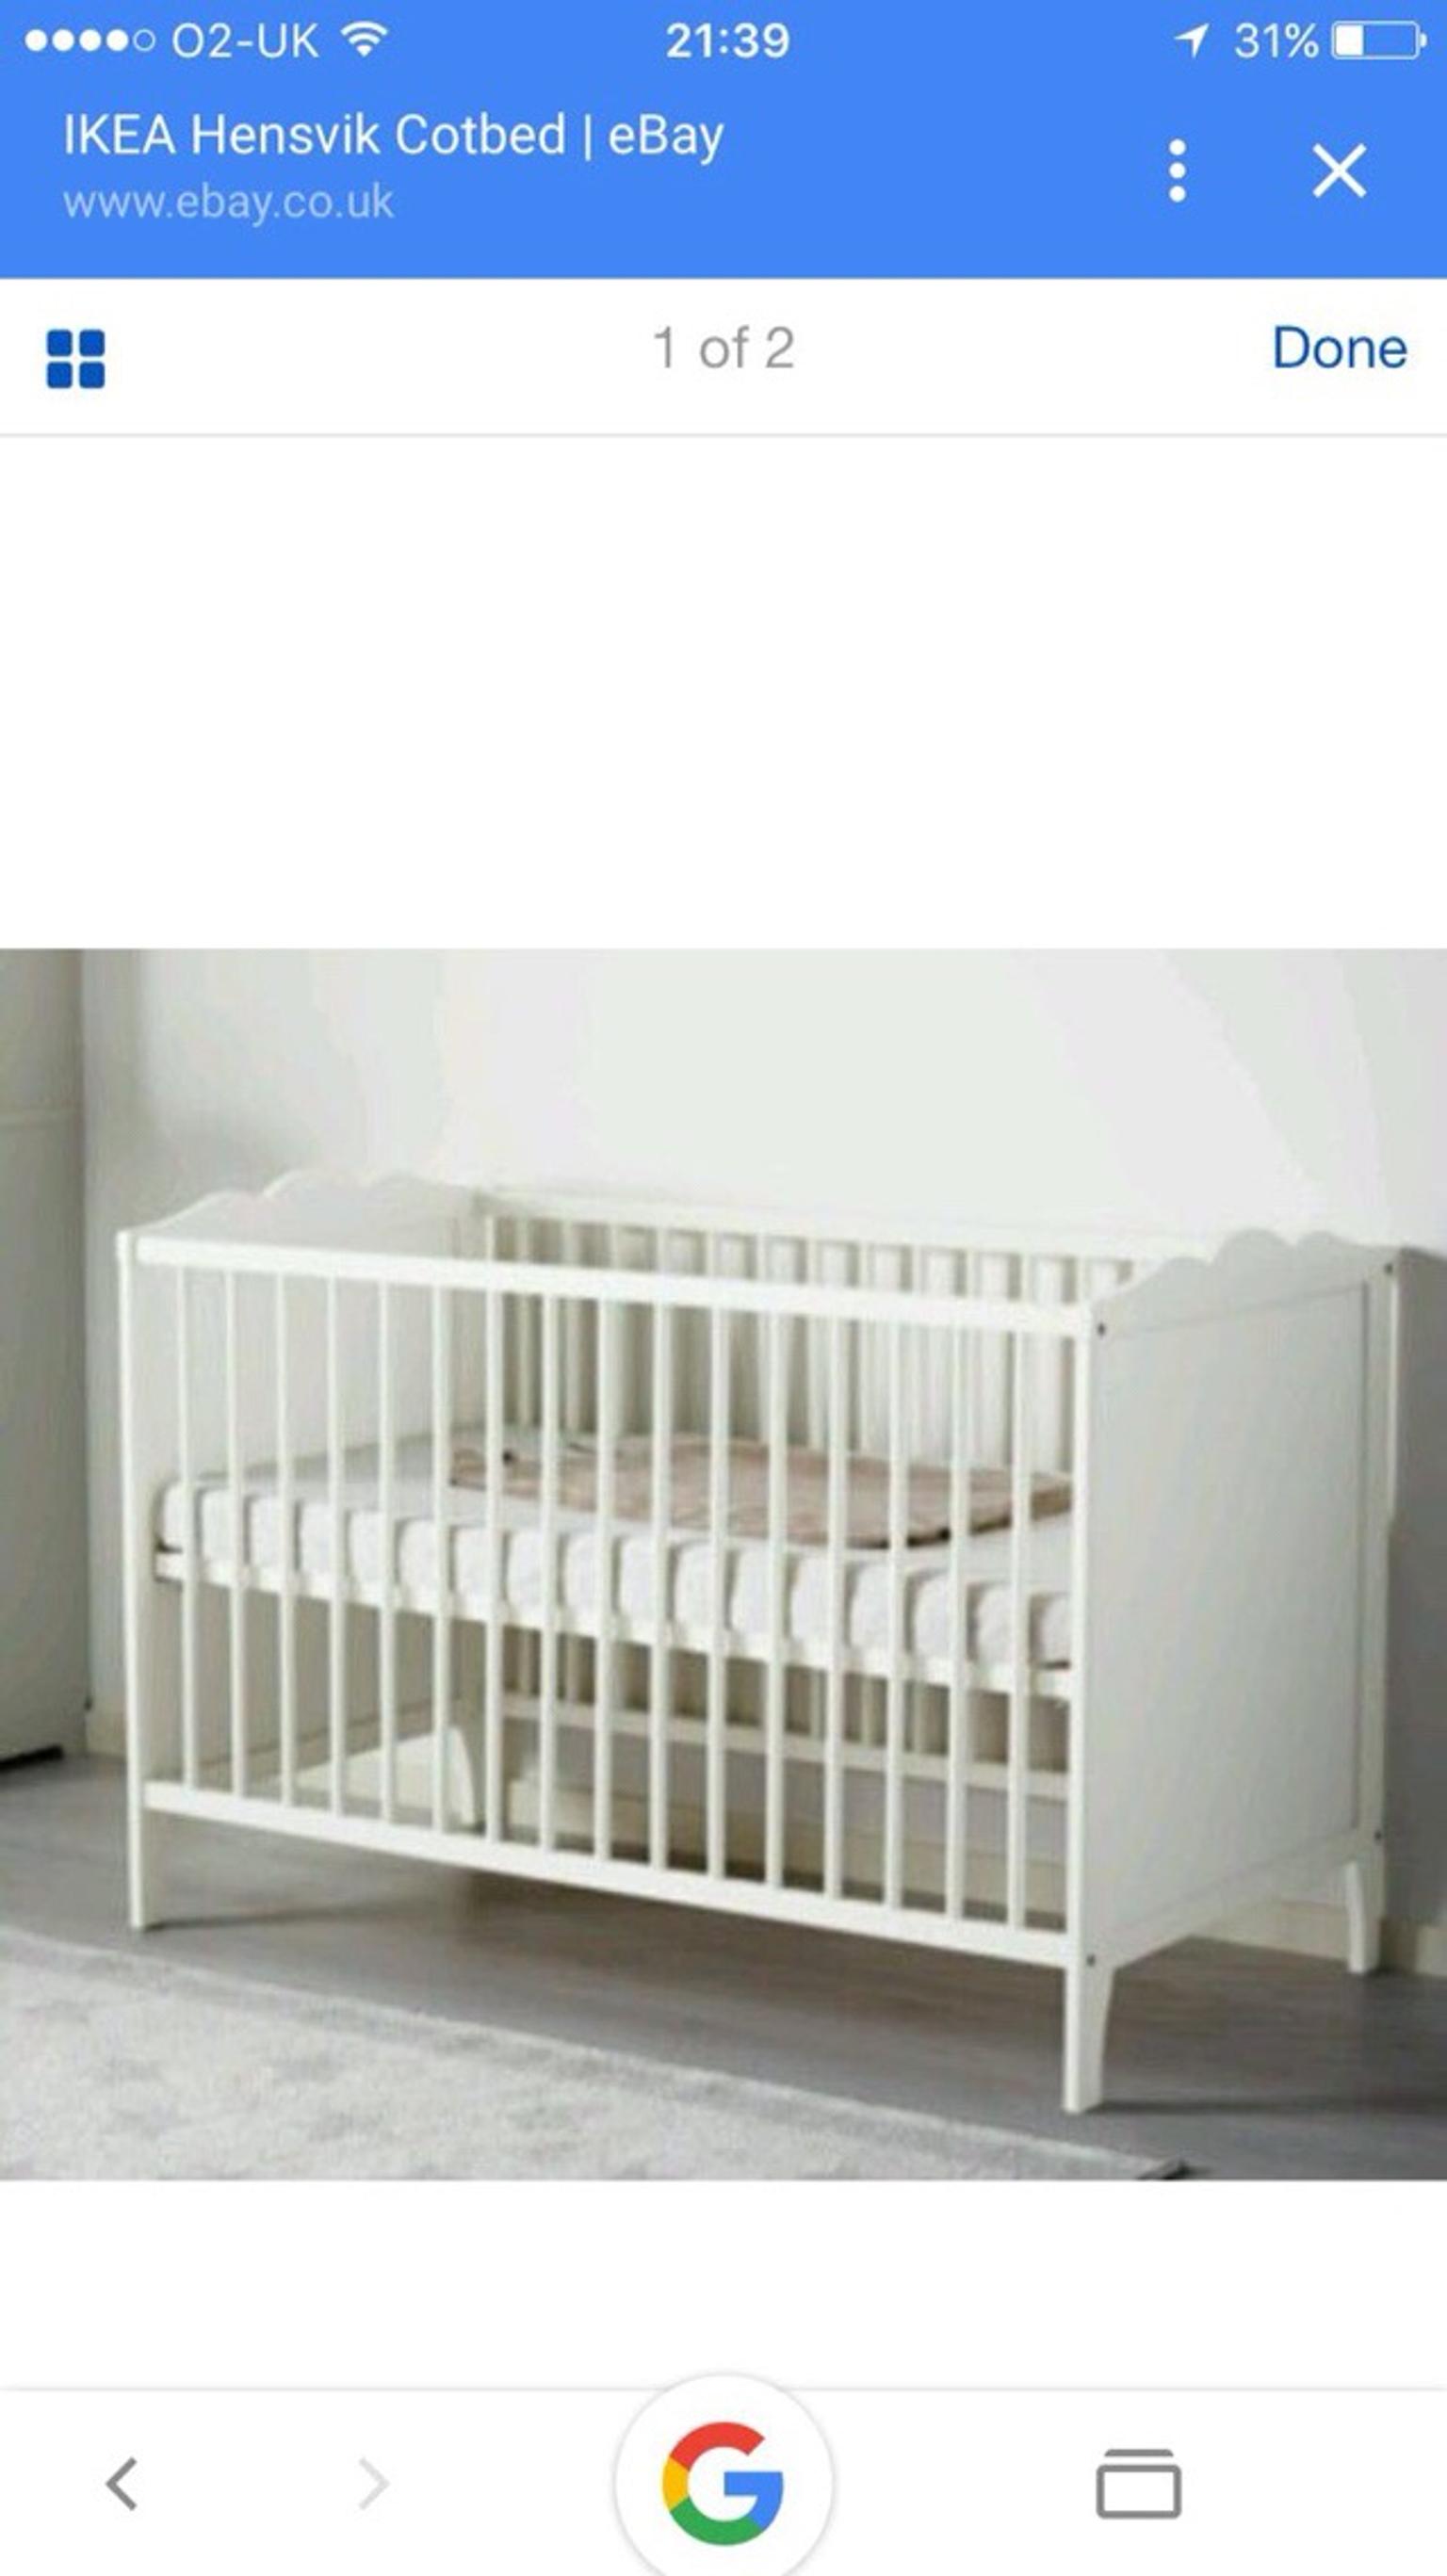 ikea white cot bed